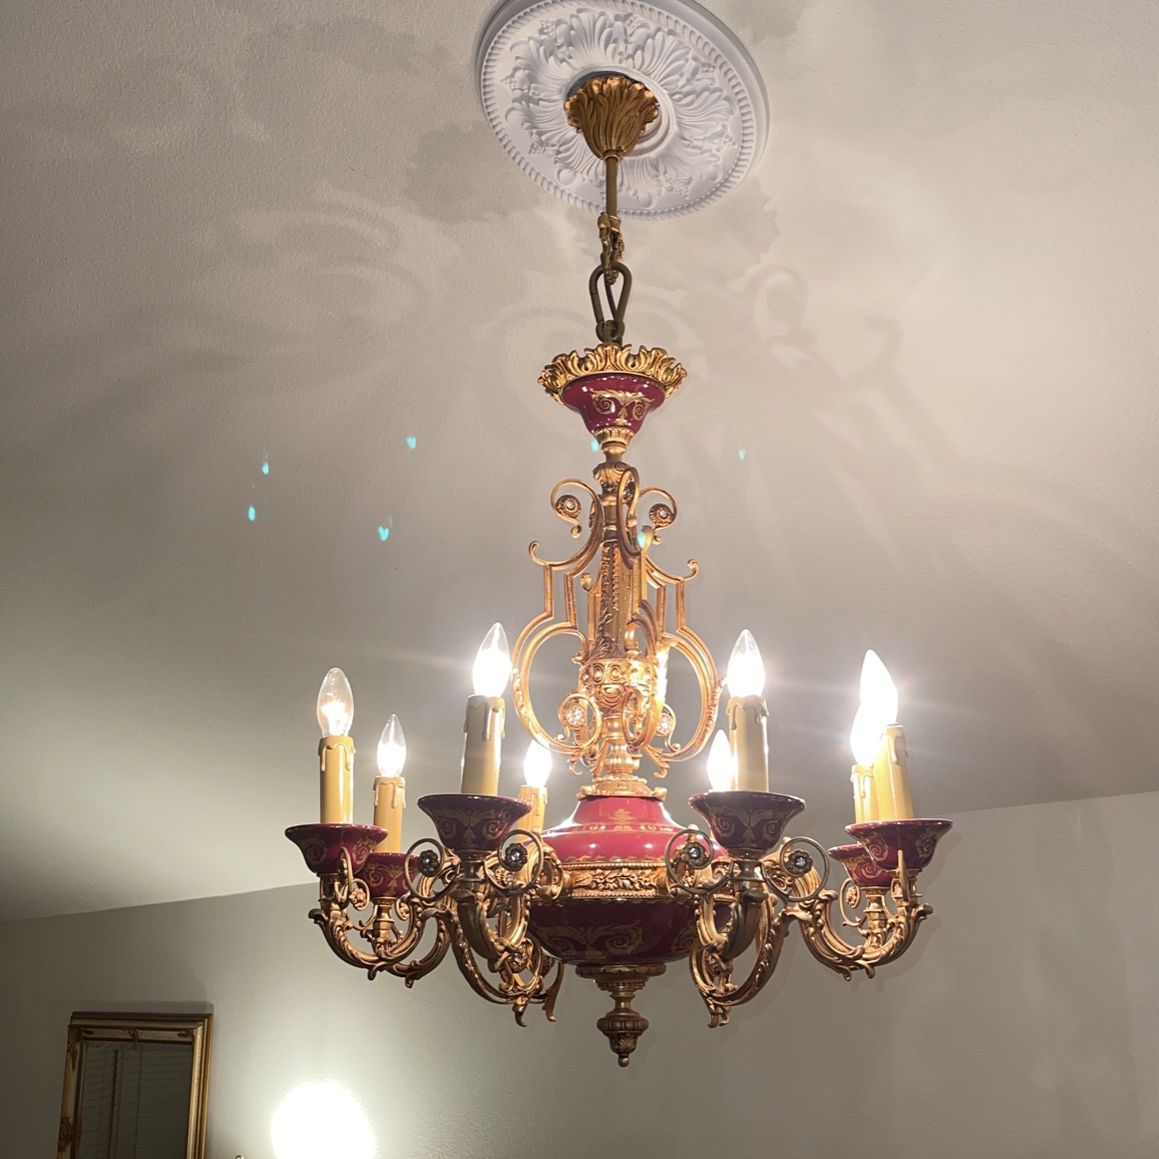 European Style Chandelier And Wall Hung Light And Decorative Candle Holder